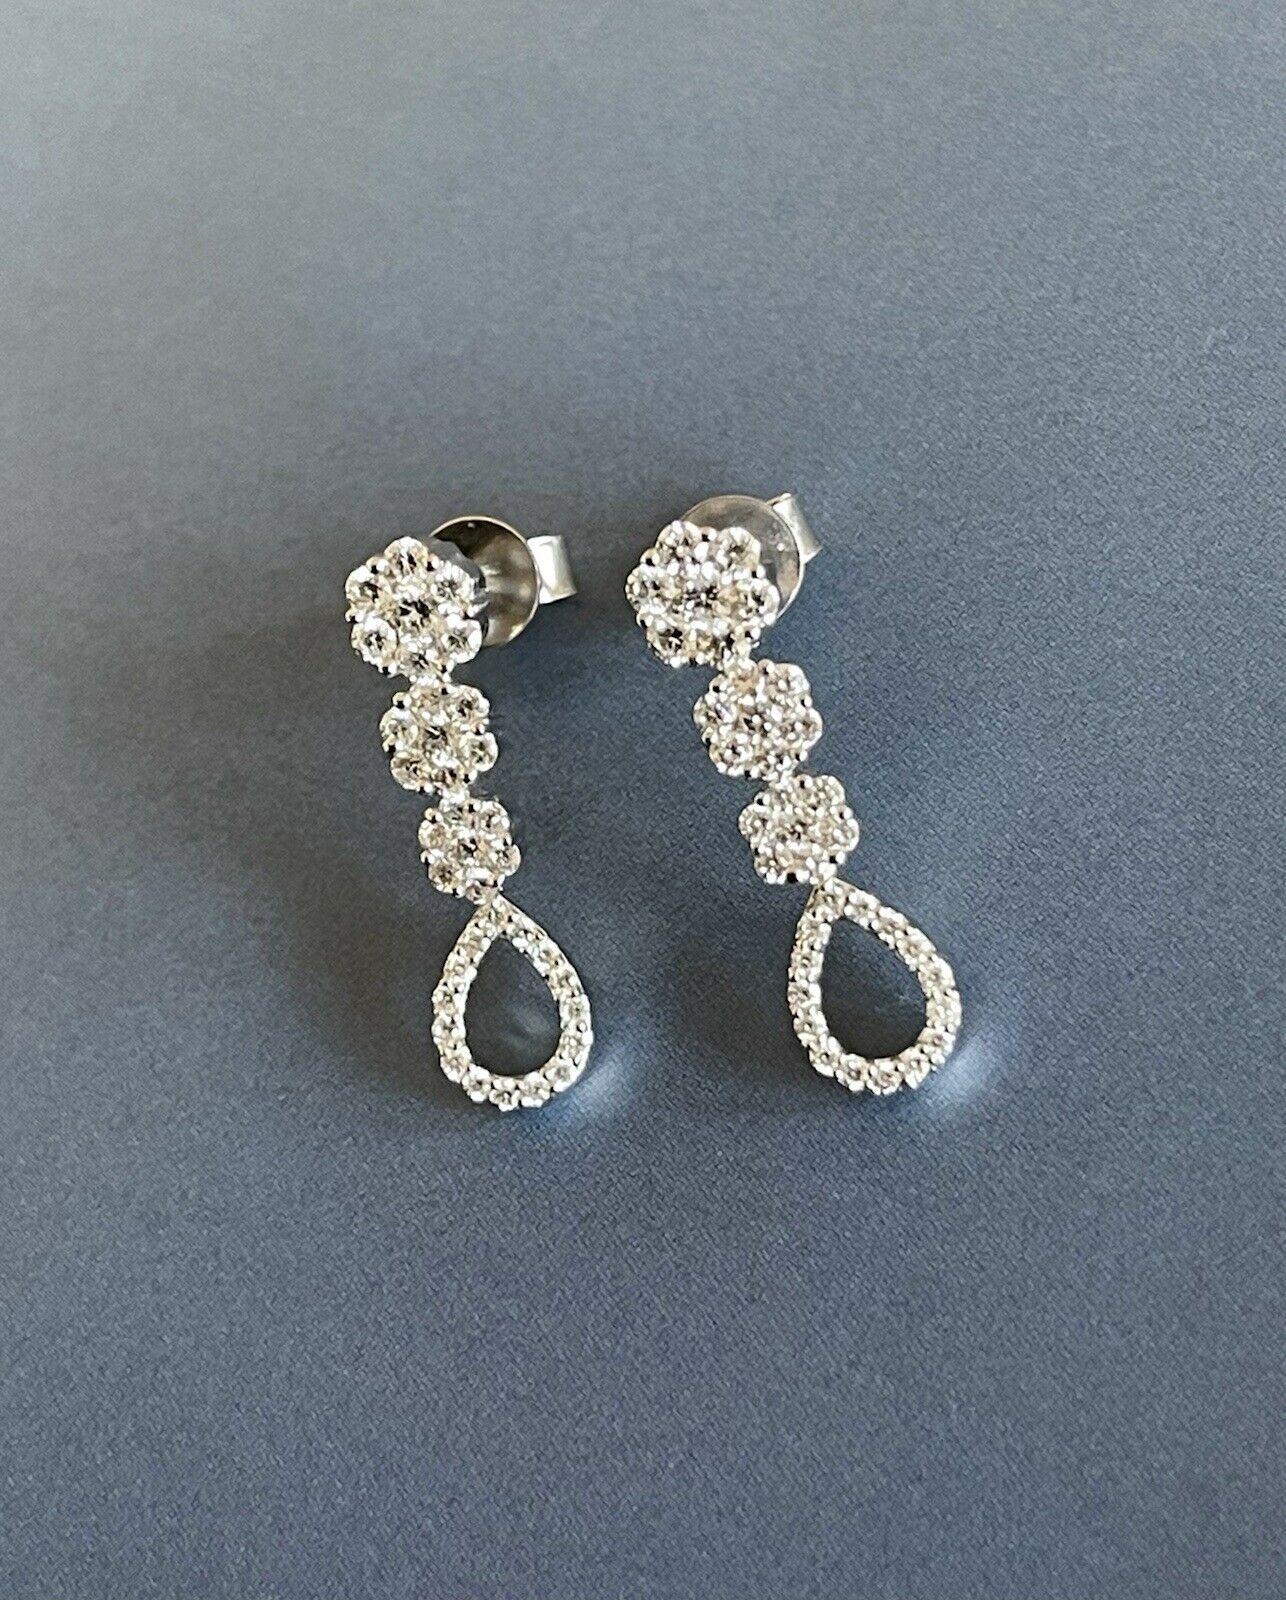 Women's 18ct White Gold Diamond Earrings 1.20ct Daisy Drop Cocktail Bridal One Carat For Sale